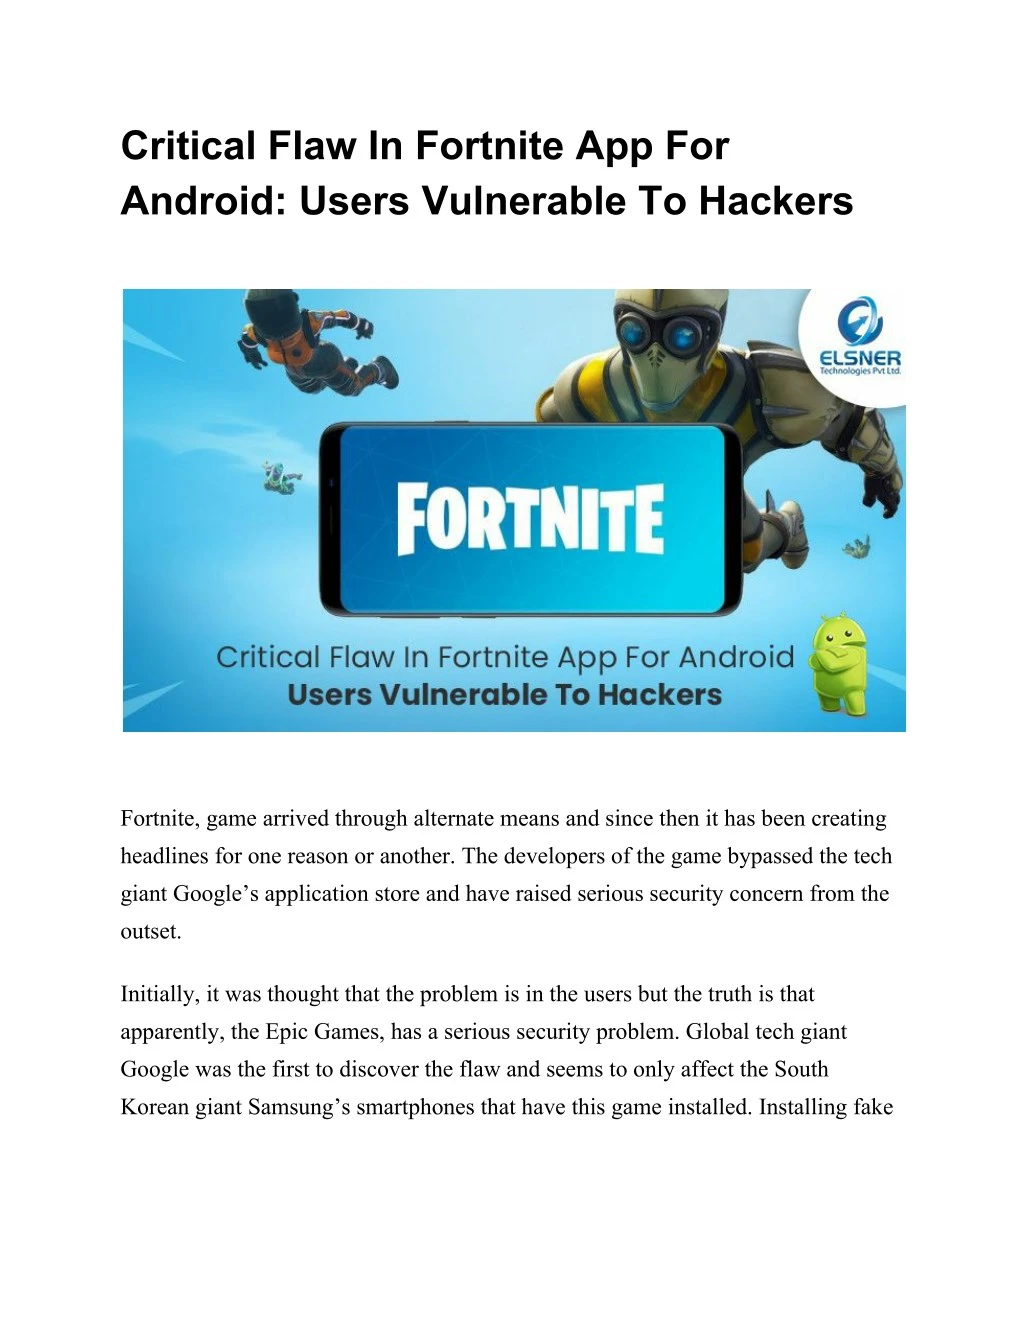 critical flaw in fortnite app for android users